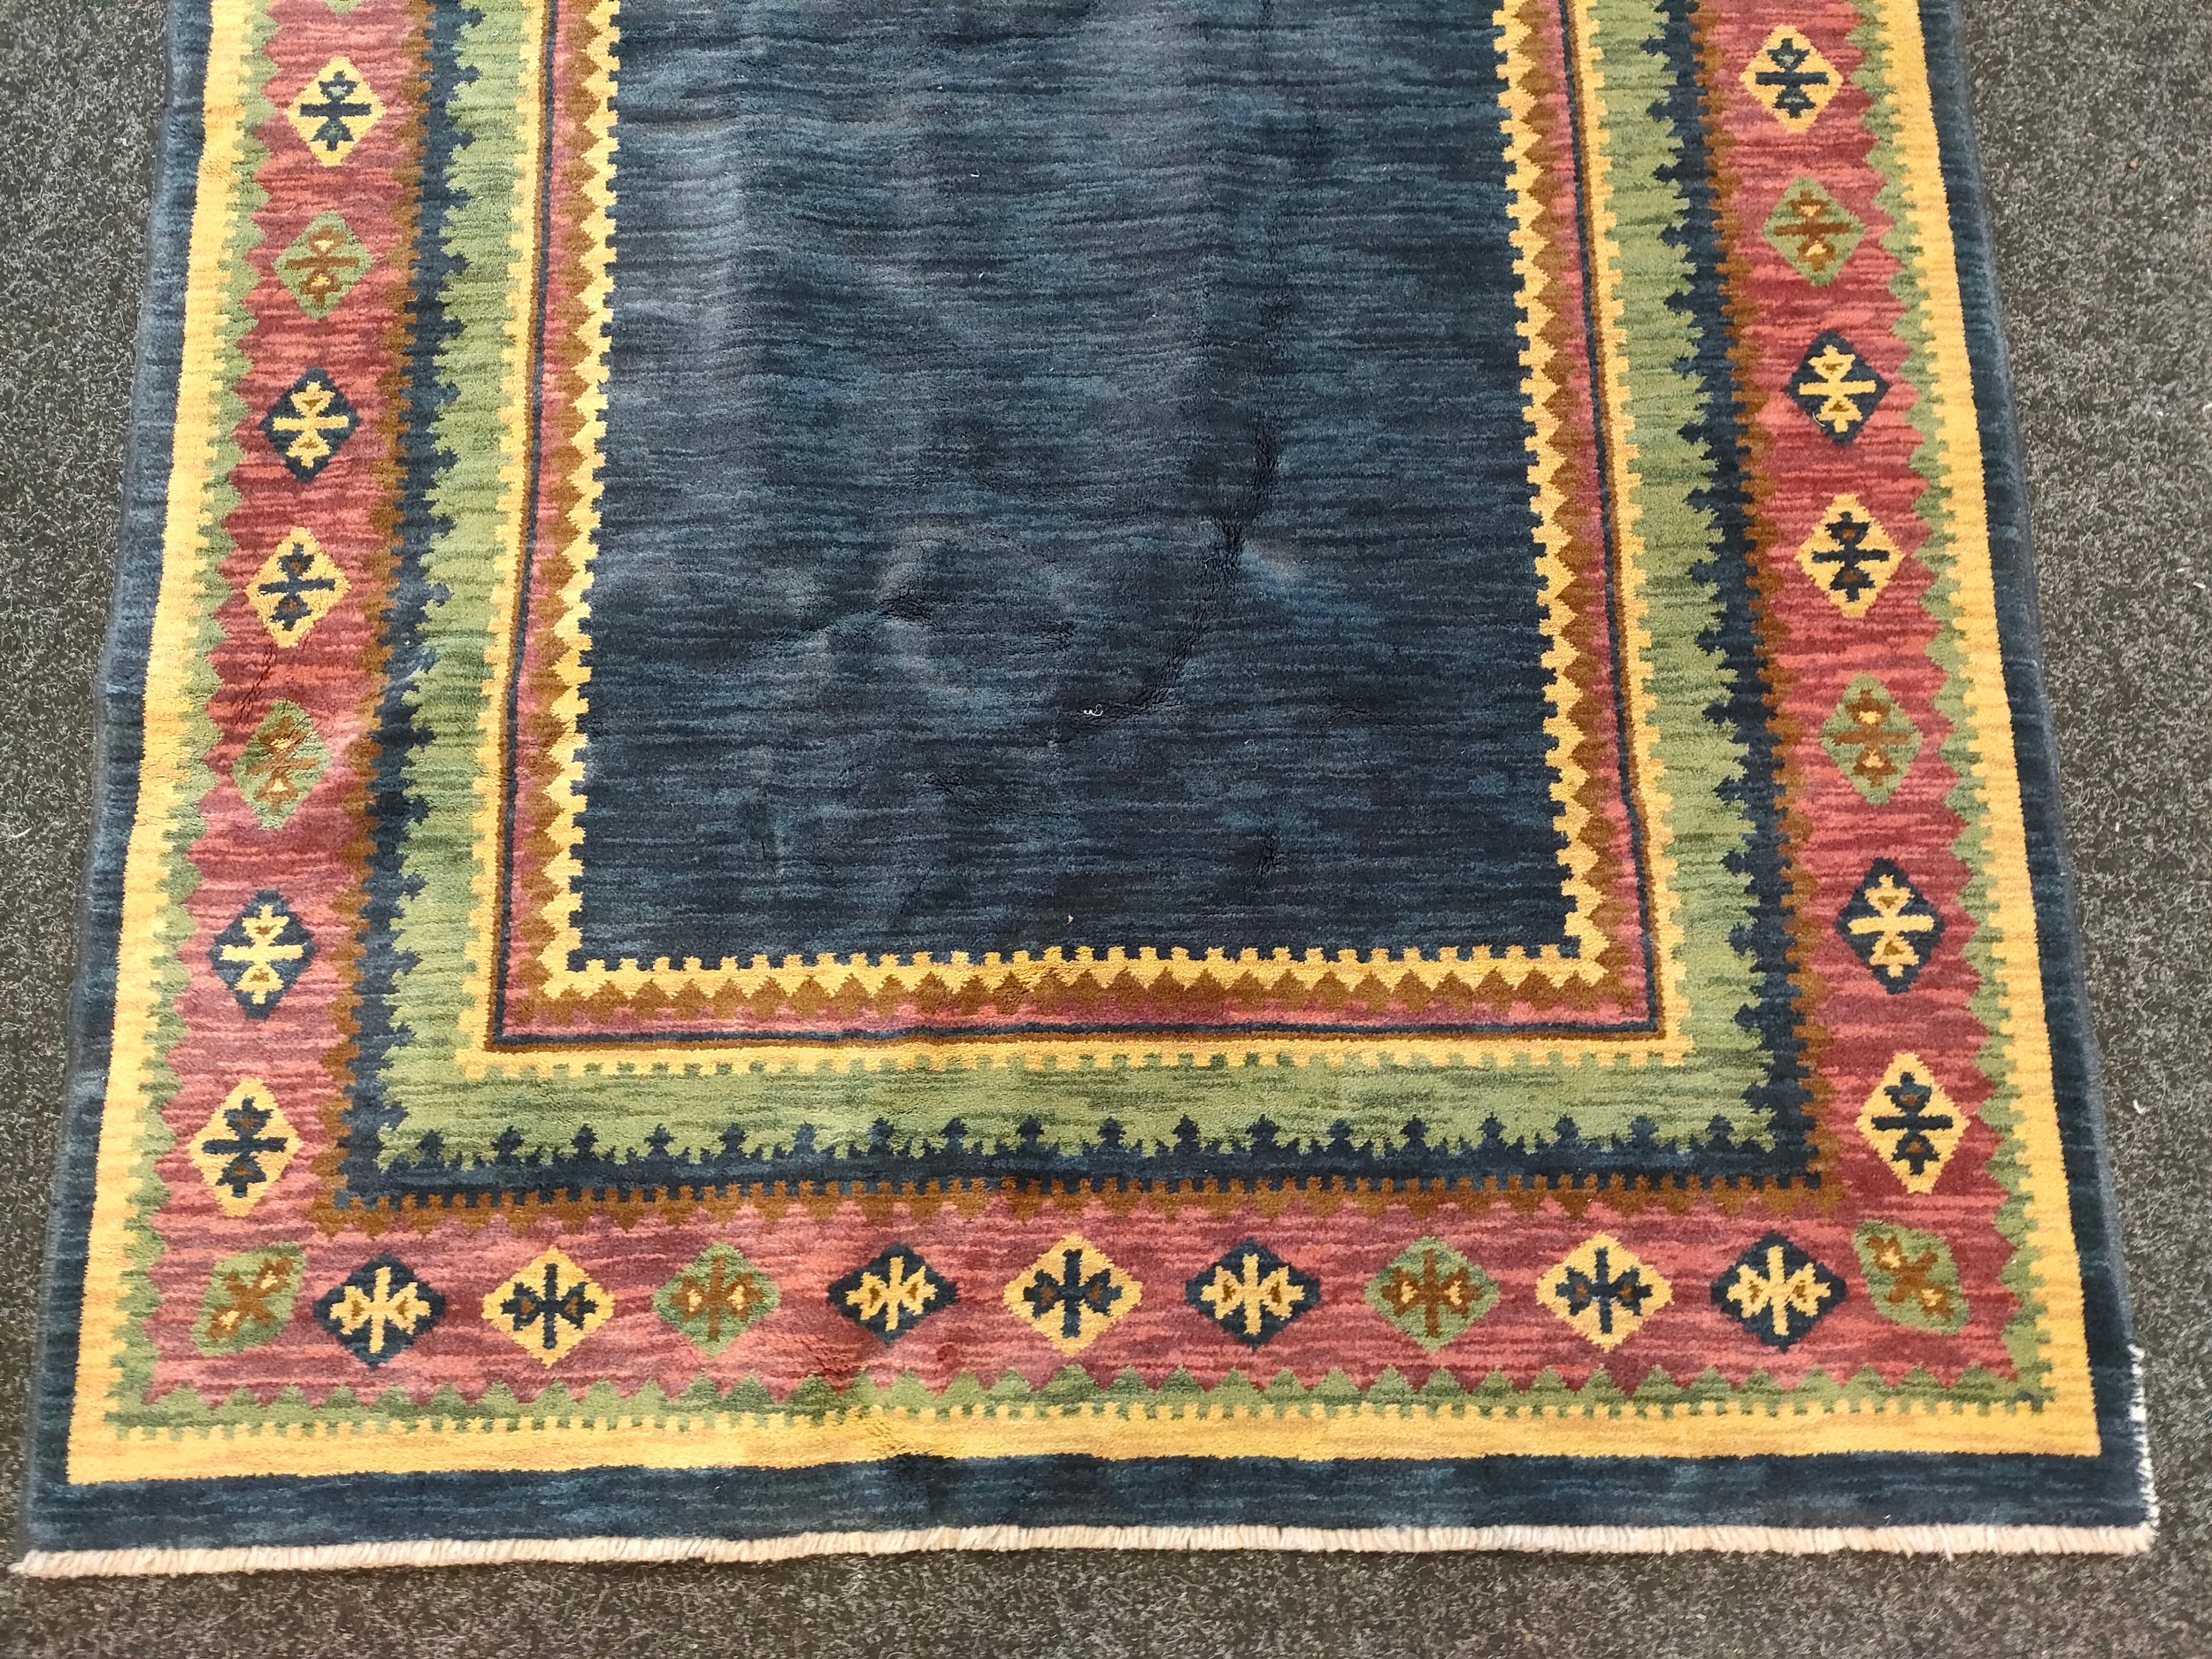 A Hand Knotted Gabbeh Turkish Rug set with a blue centre & Turkish border pattern [233.5x135cm] - Image 2 of 4